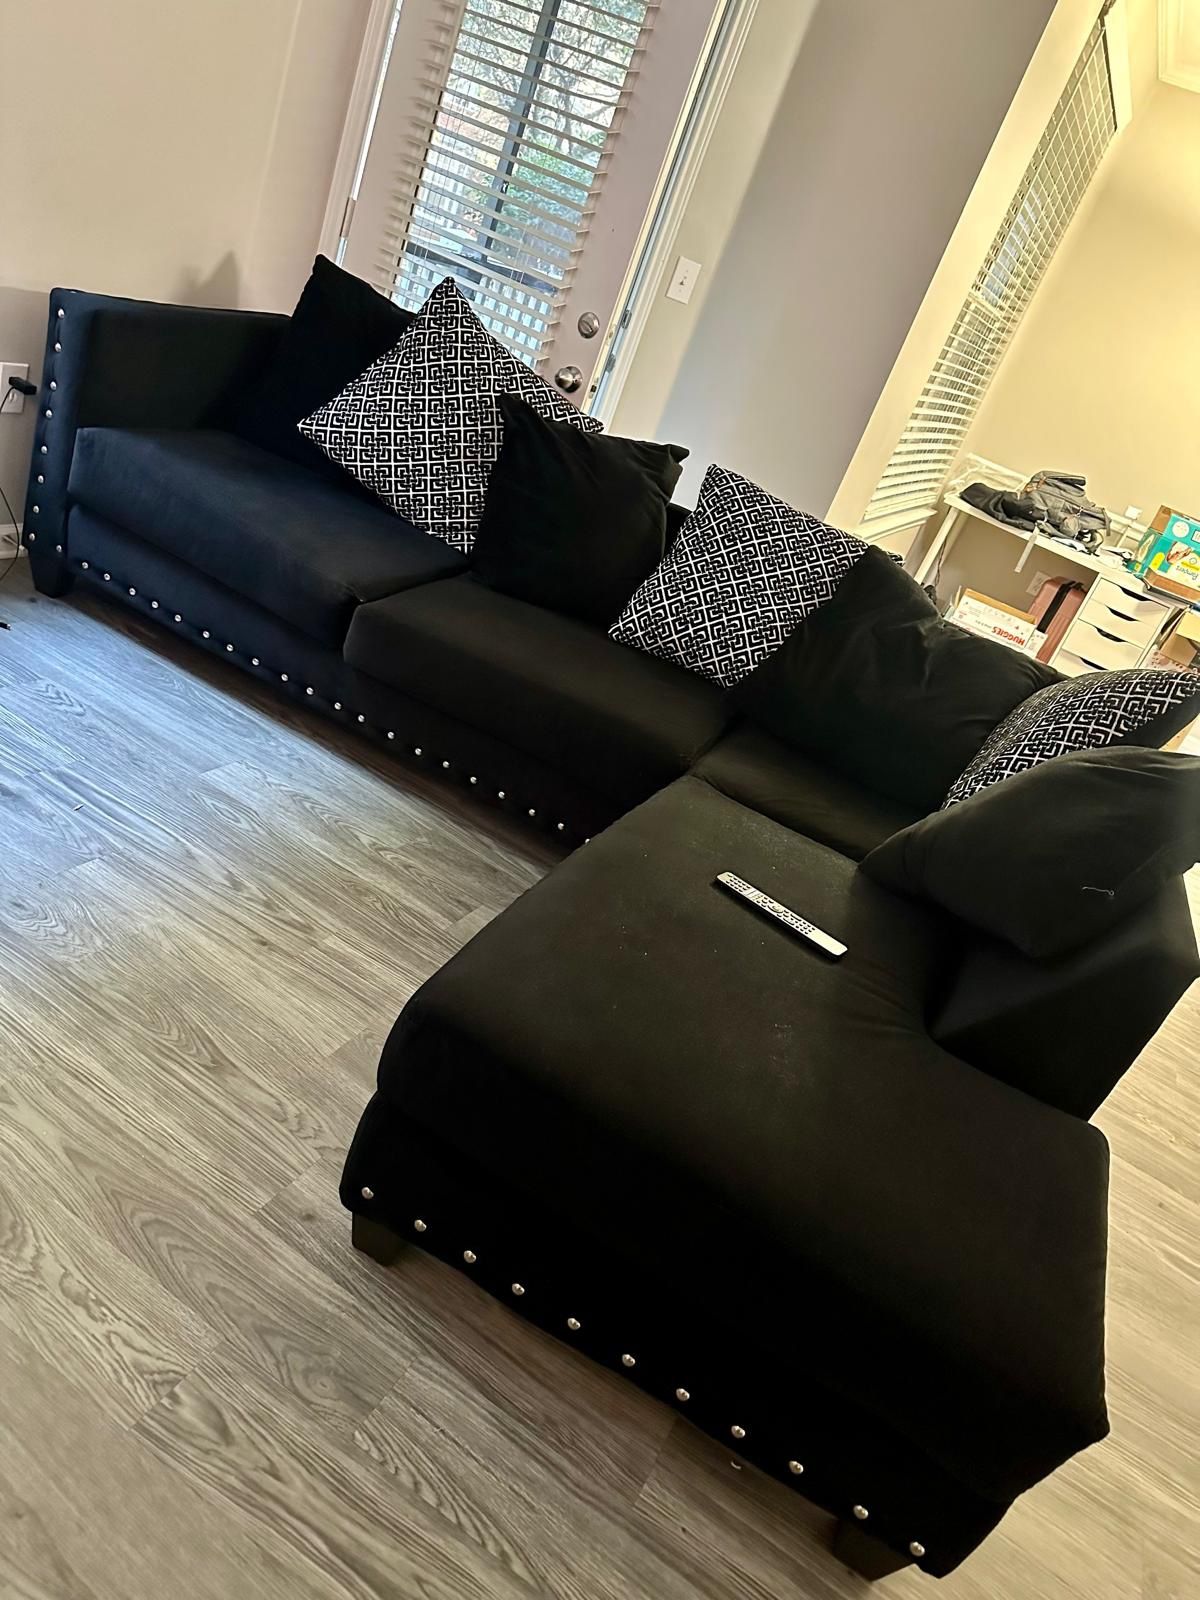 Black L Shaped Couch 